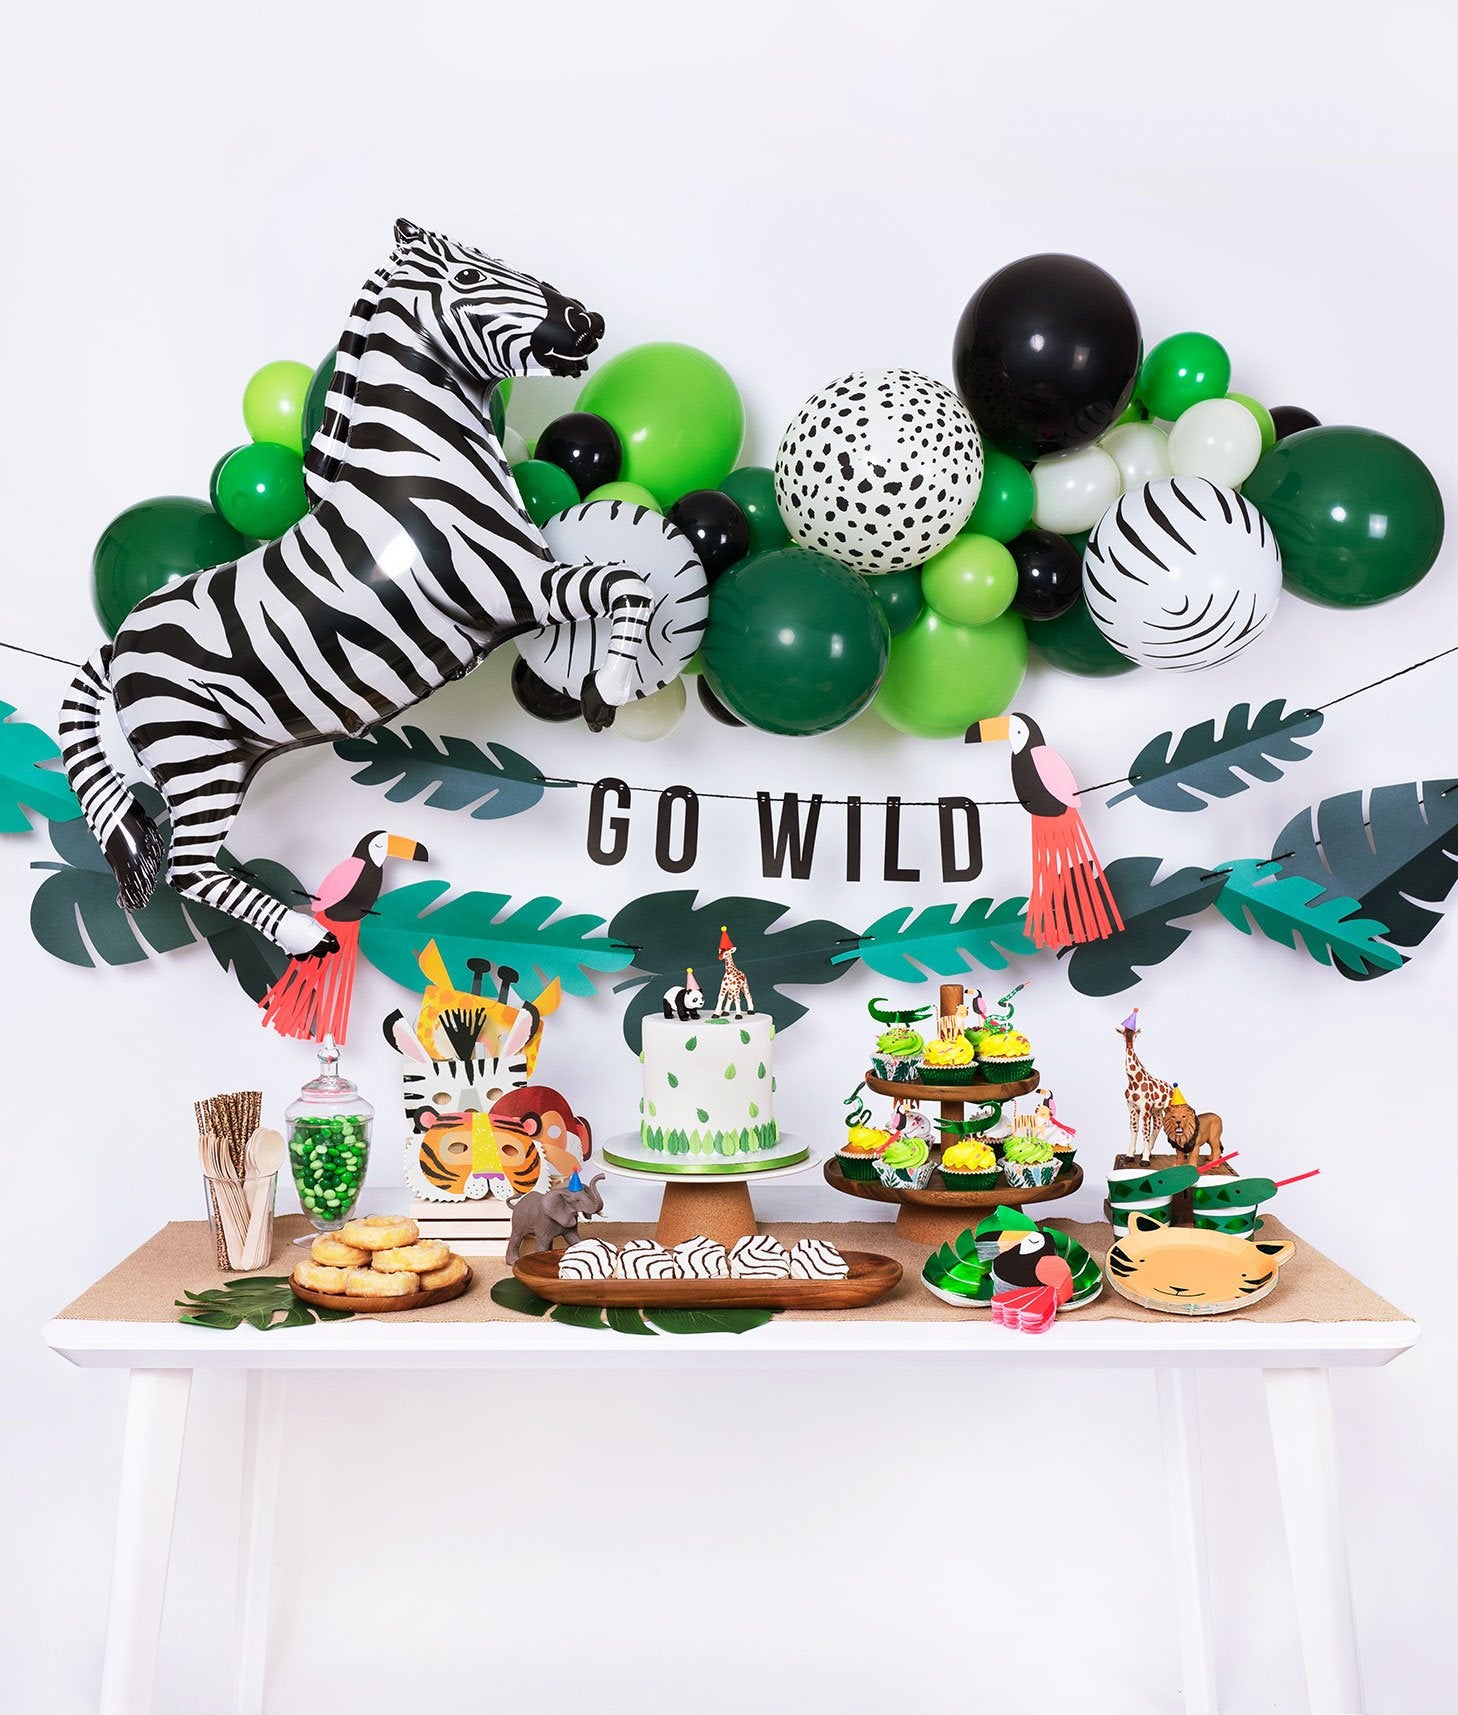 Momo Party jungle themed birthday party box with animal print balloon garland, zebra foil balloon, go wild garland decoration and tiger plates, tucan napkins, green foil plates, cake, cupcake, animal mask for kid's safari themed inspiration 